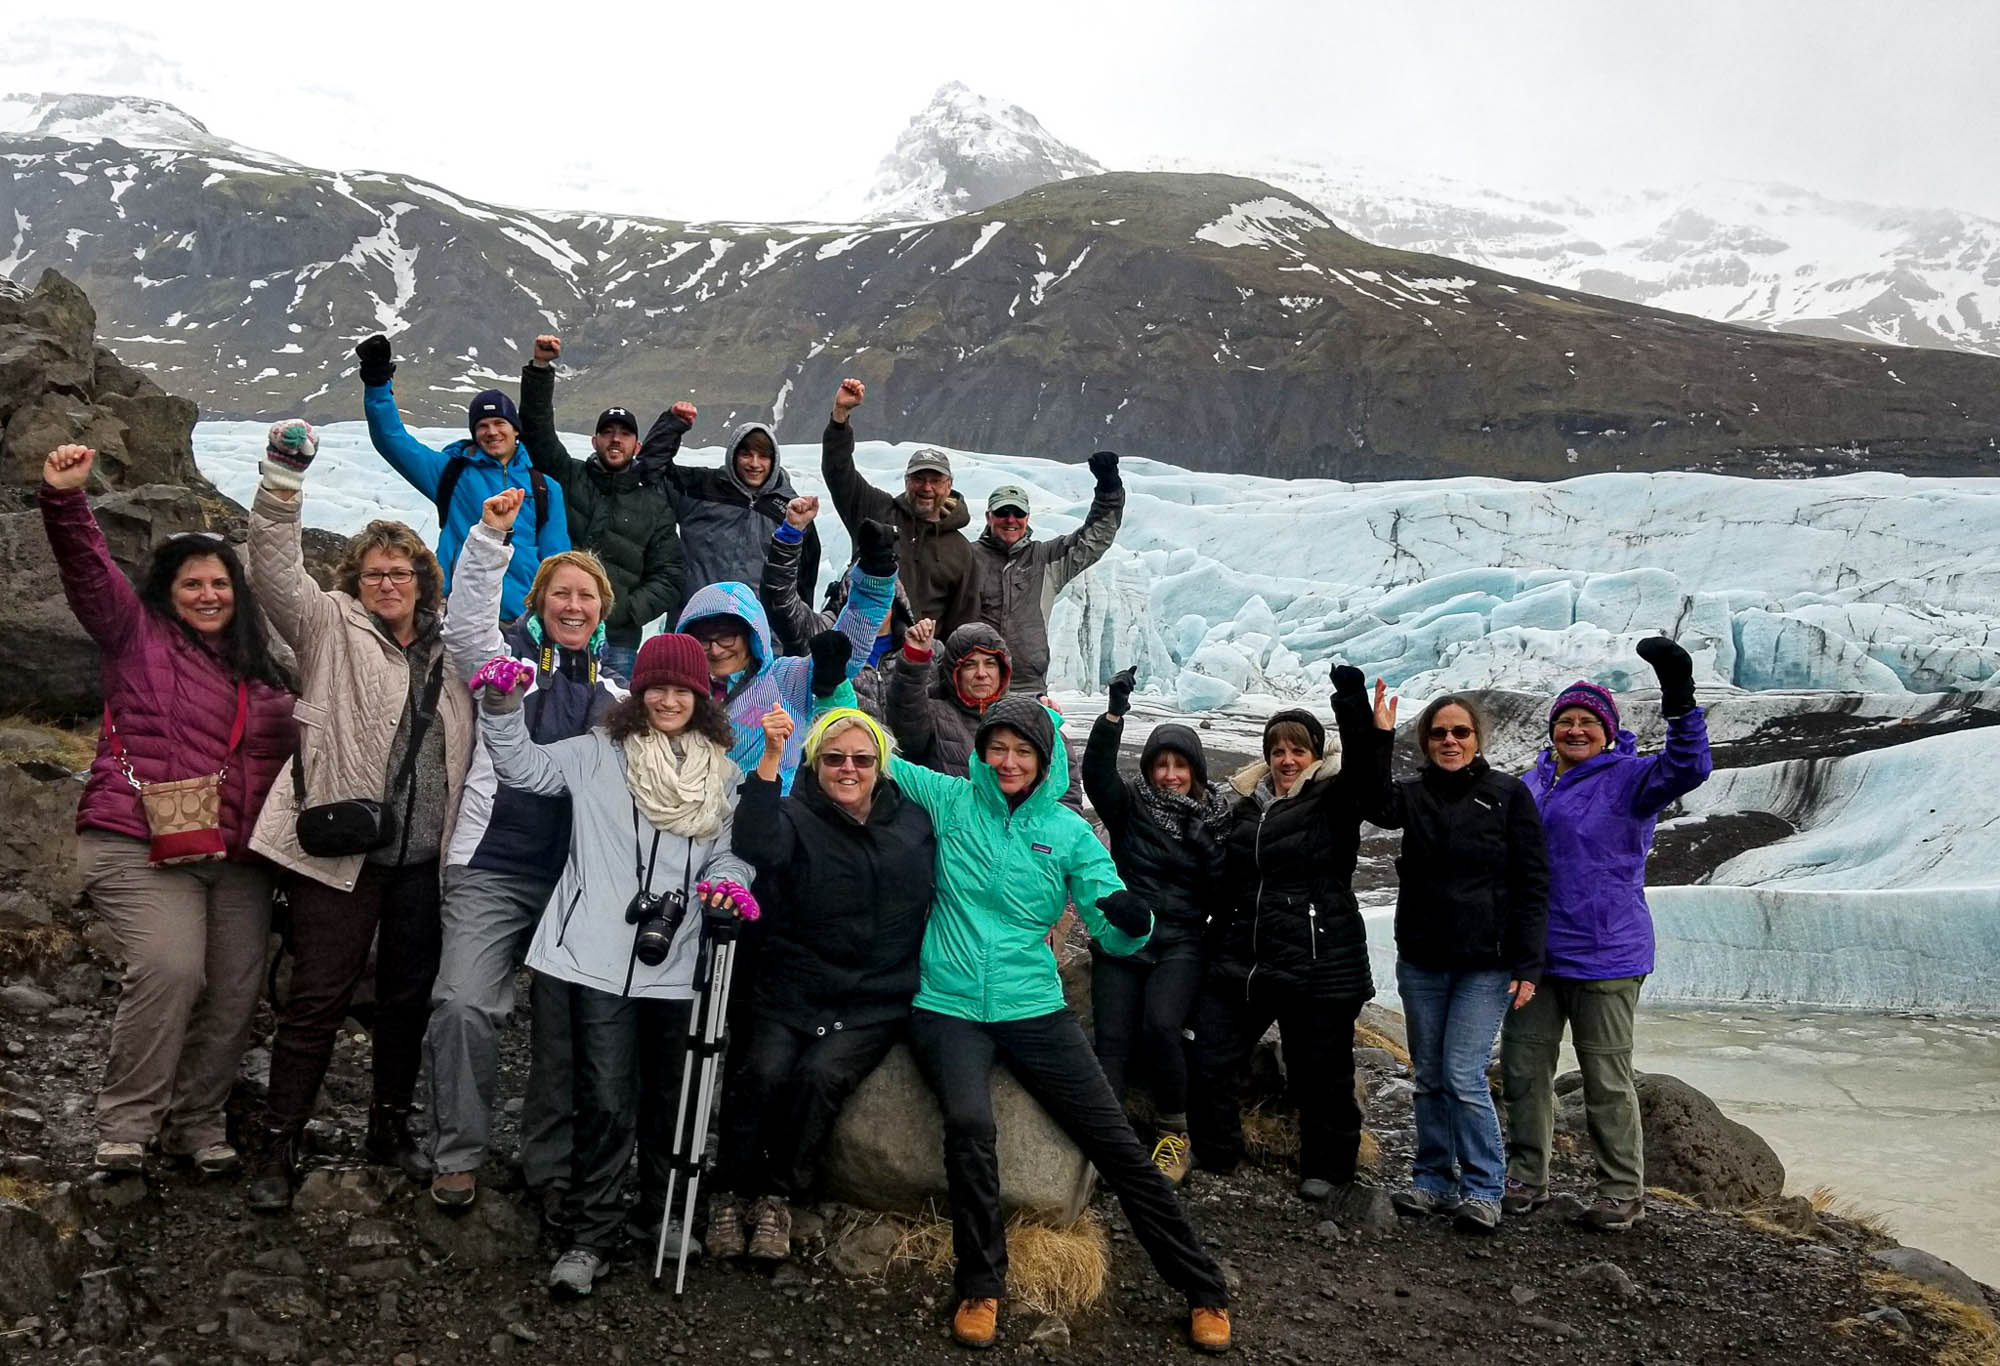 Tour group standing by a glacier in iceland cheering